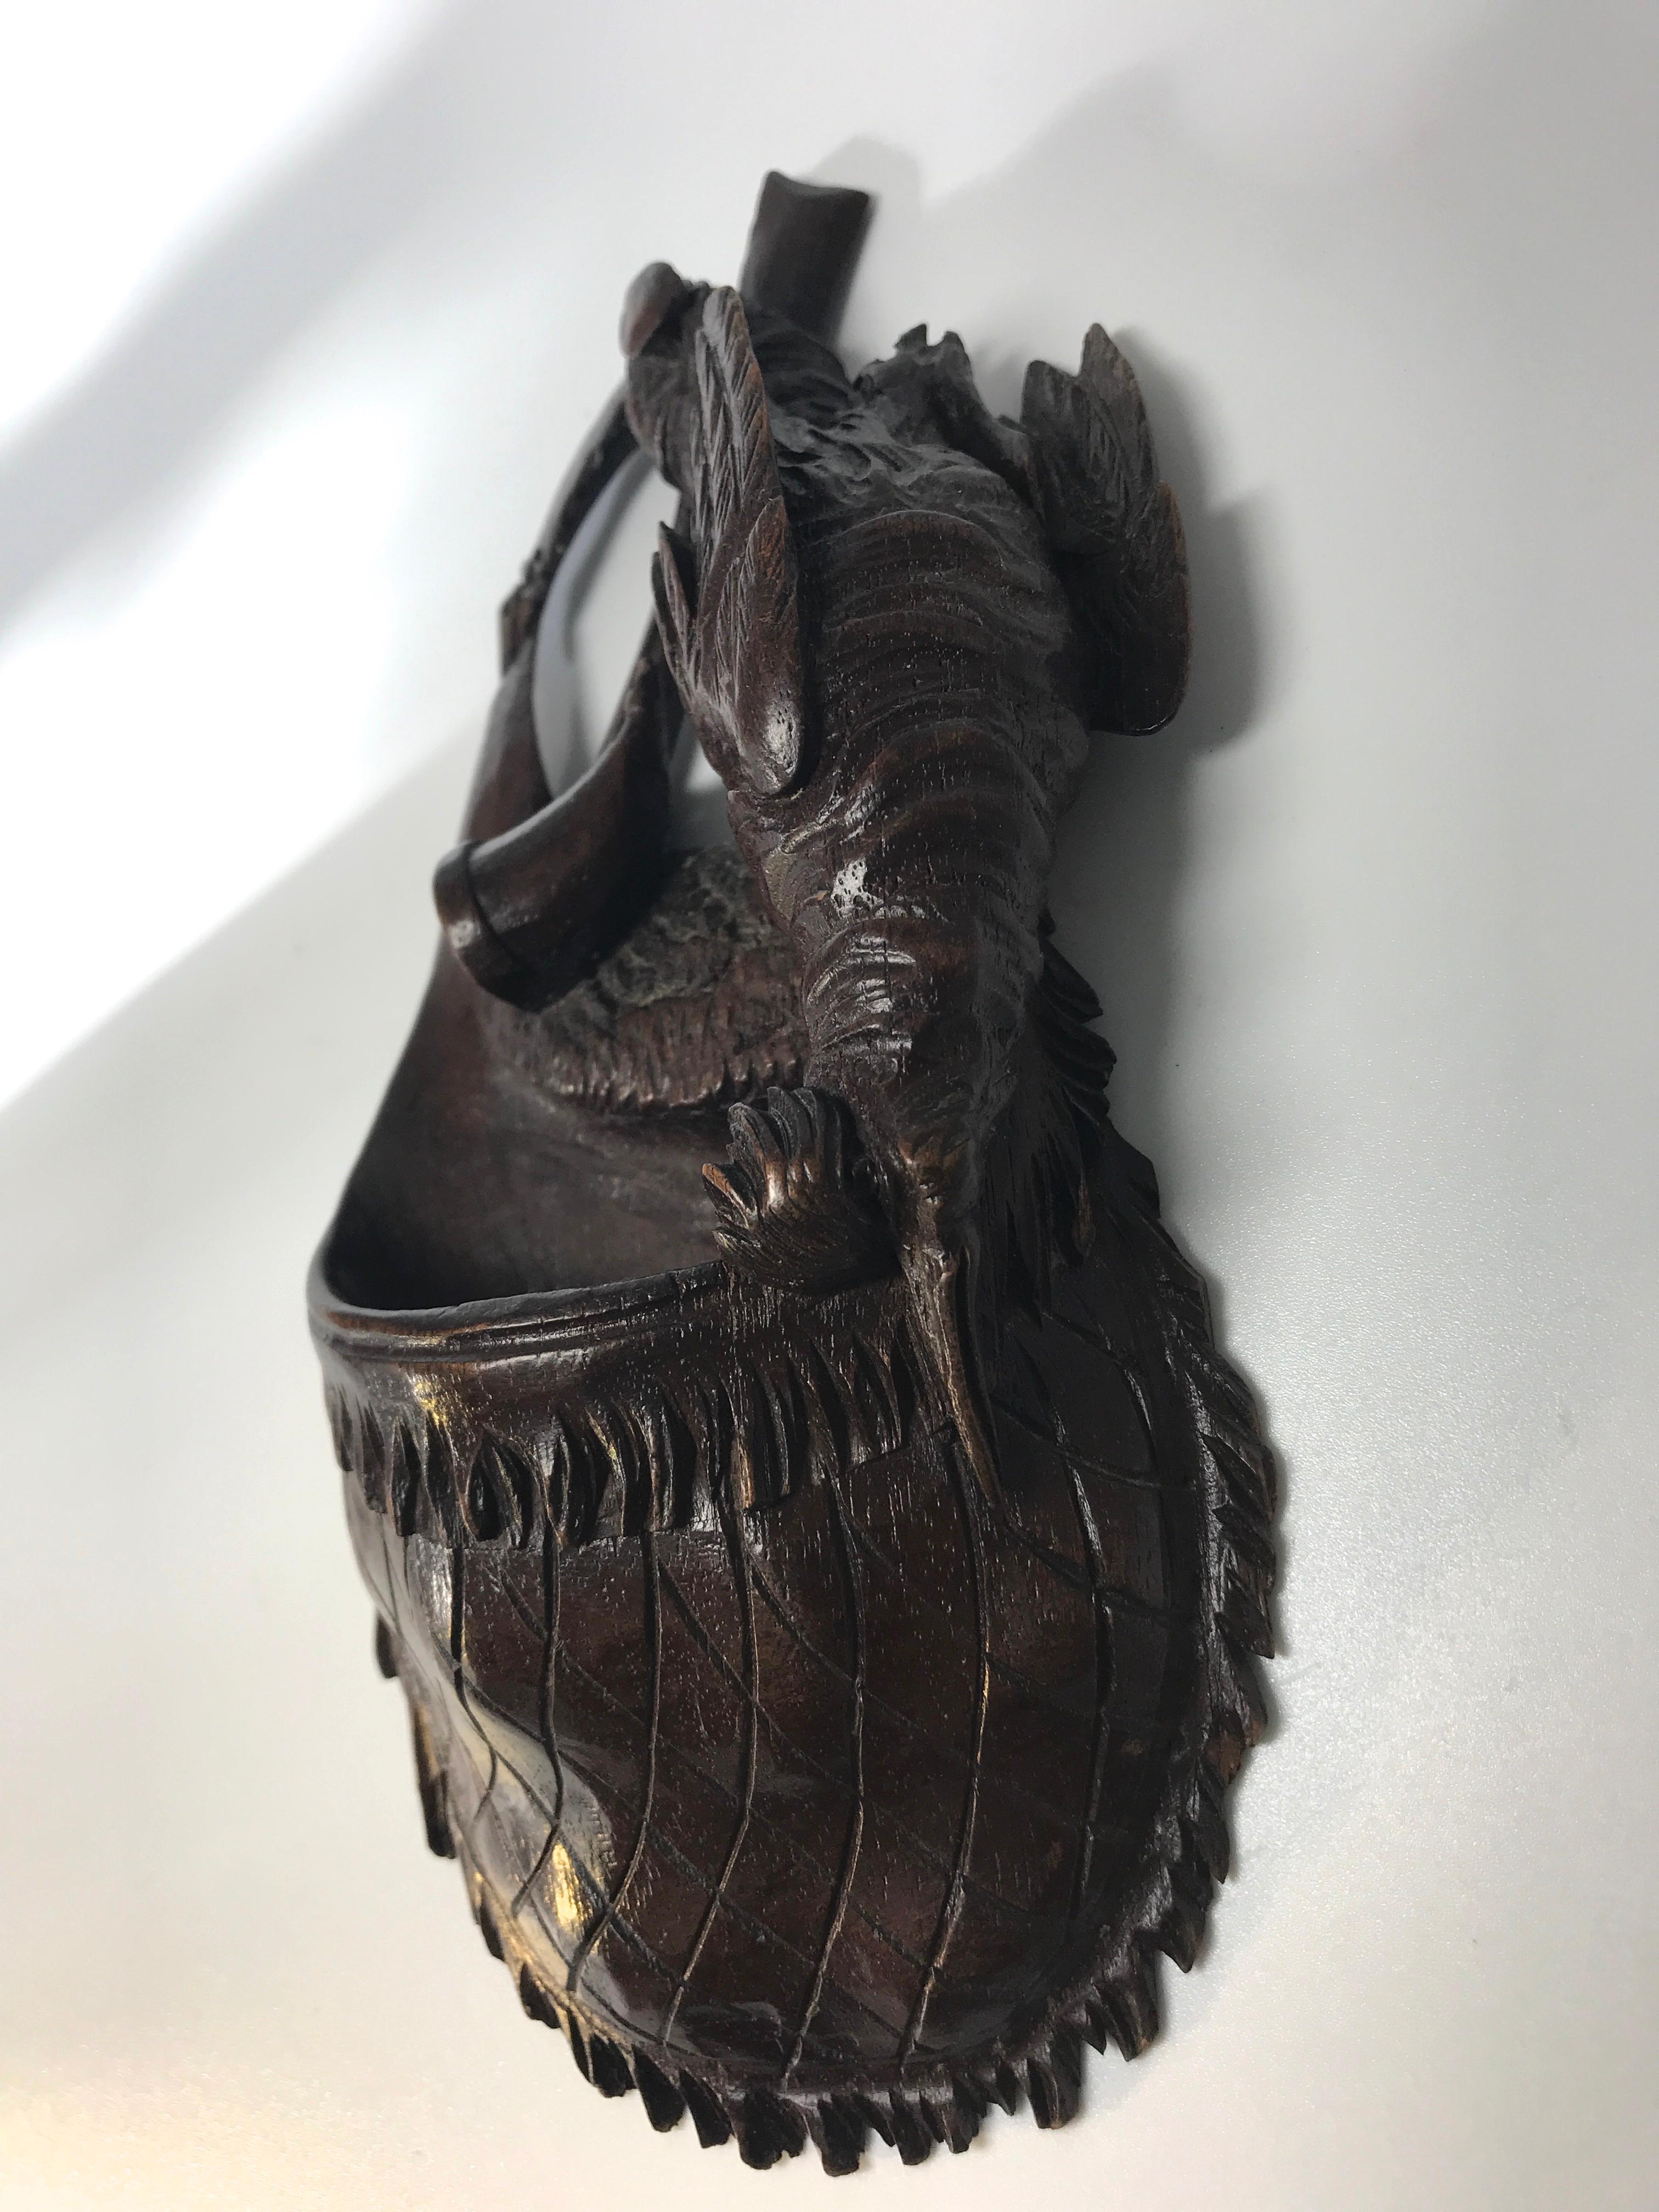 Black Forest antique hand carved miniature wall pocket of a fringed game hunter's bag with woodcock, rifle and horn
Rich, dark patina and very well crafted hand carved detailing
Circa 1920
Measures: Height 7 inch, width 3.25 inch
In very good